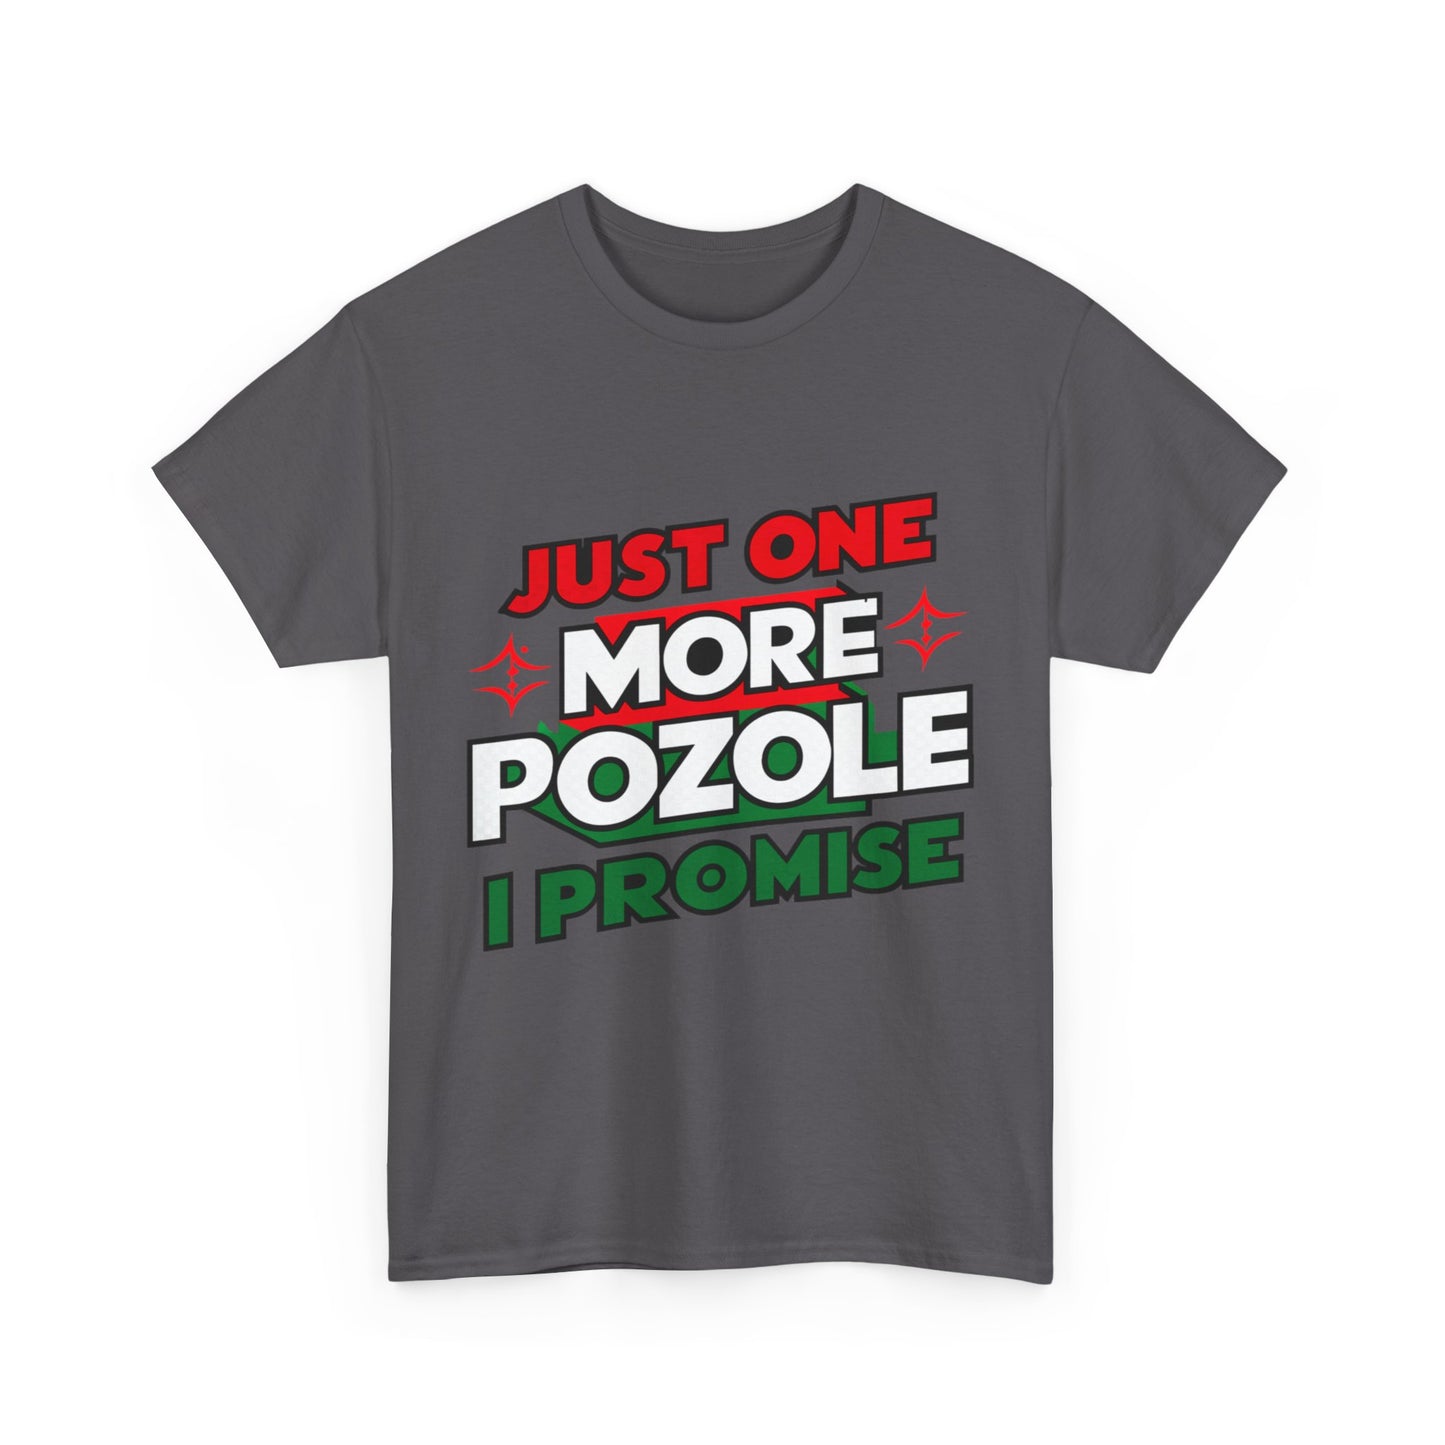 Just One More Pozole I Promise Mexican Food Graphic Unisex Heavy Cotton Tee Cotton Funny Humorous Graphic Soft Premium Unisex Men Women Charcoal T-shirt Birthday Gift-18